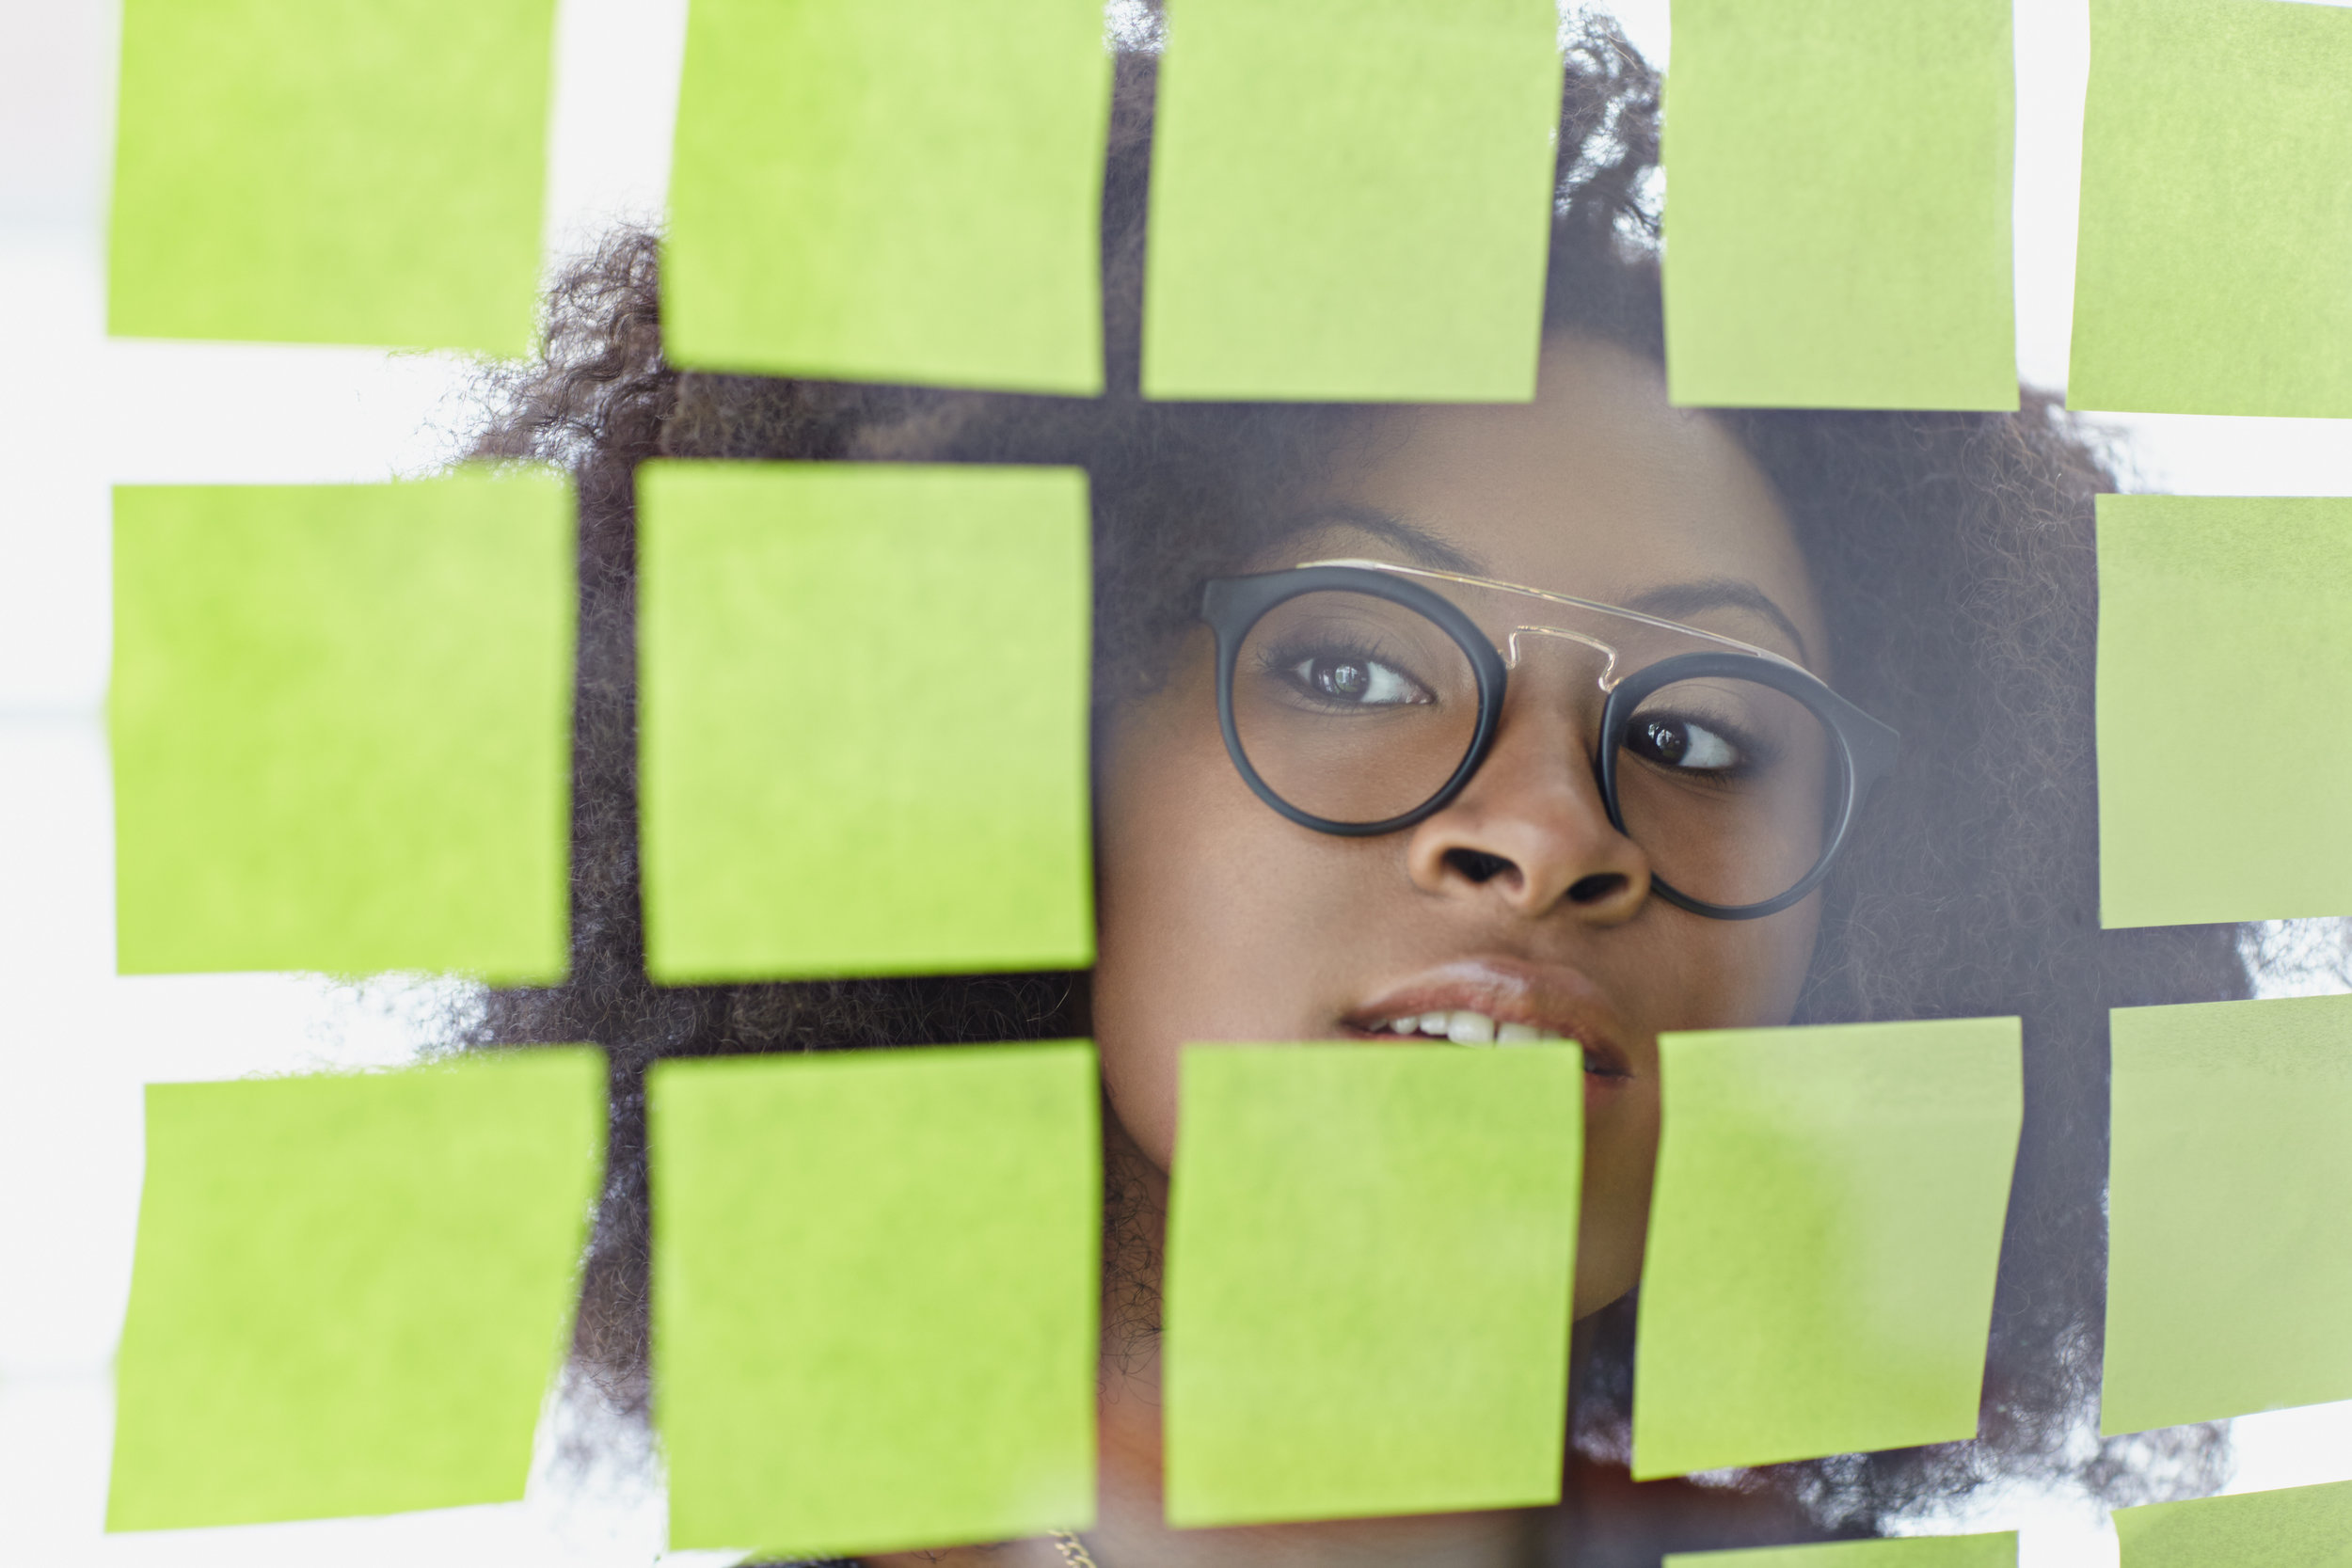 photodune-15095119-portrait-of-a-business-woman-with-an-afro-behind-sticky-notes-in-bright-glass-office-xxl.jpg